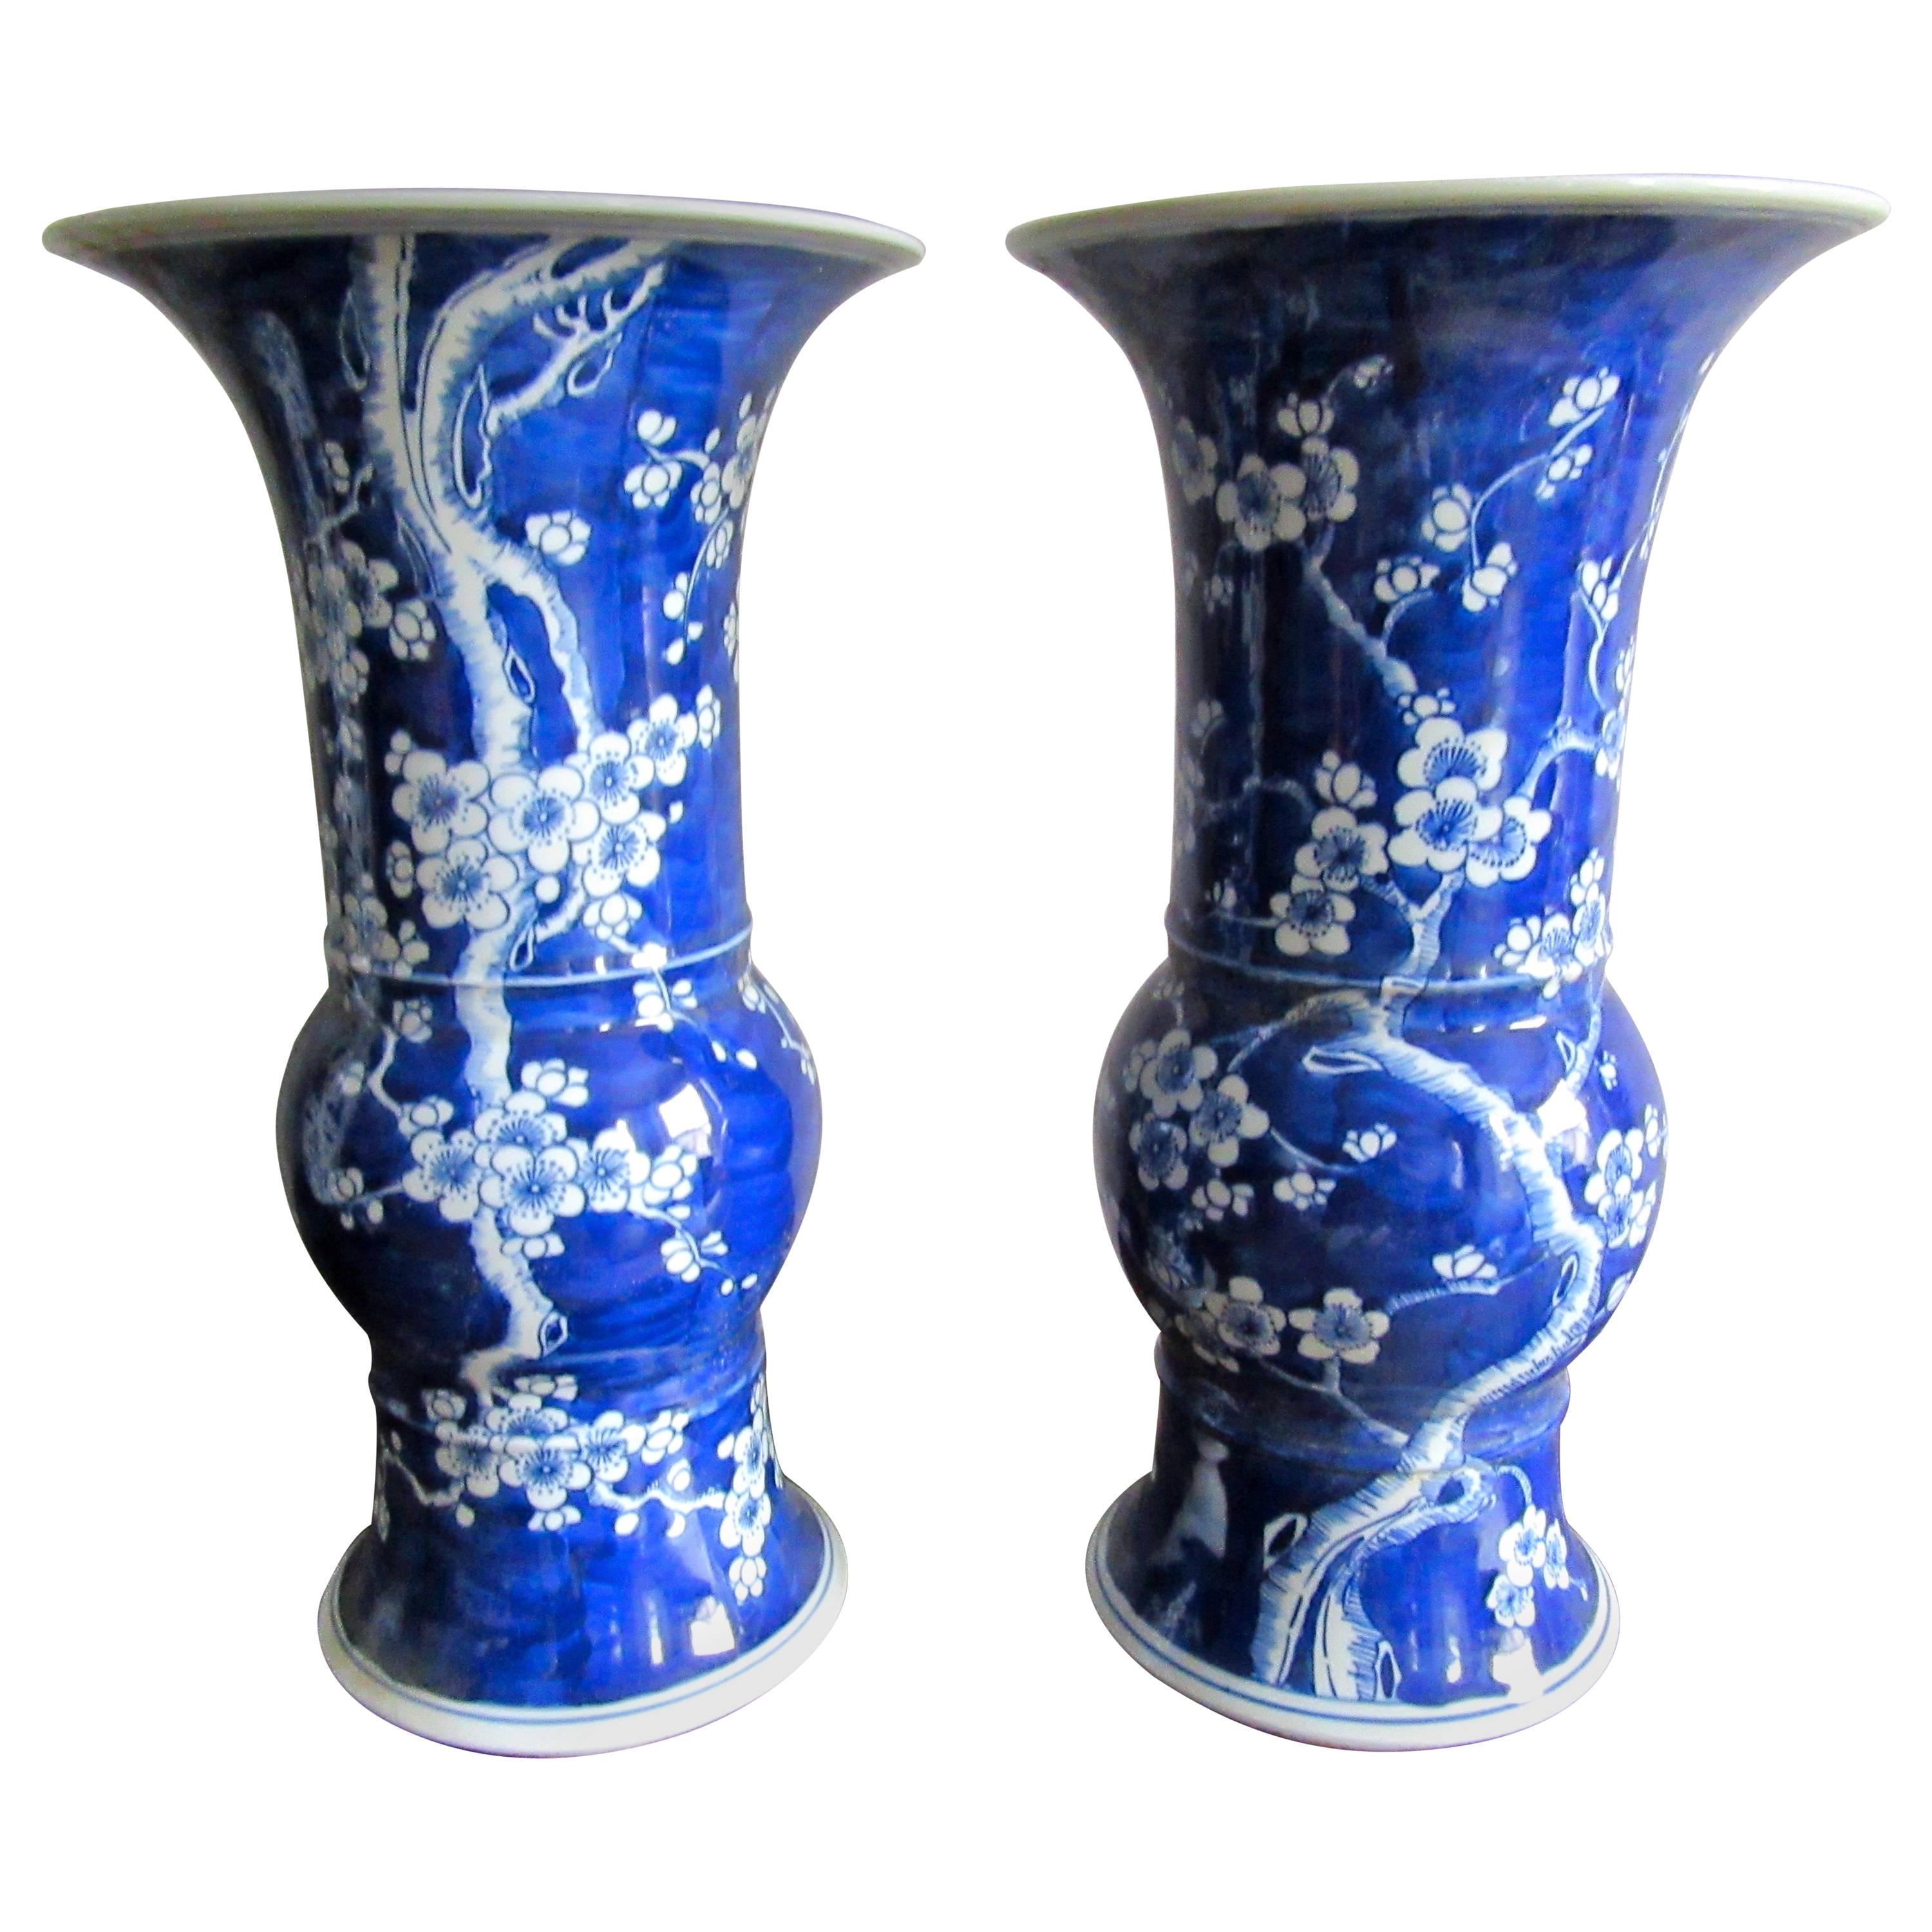 Pair of Chinese Blue & White Porcelain Baluster Vases with Cherry Blossom Motif